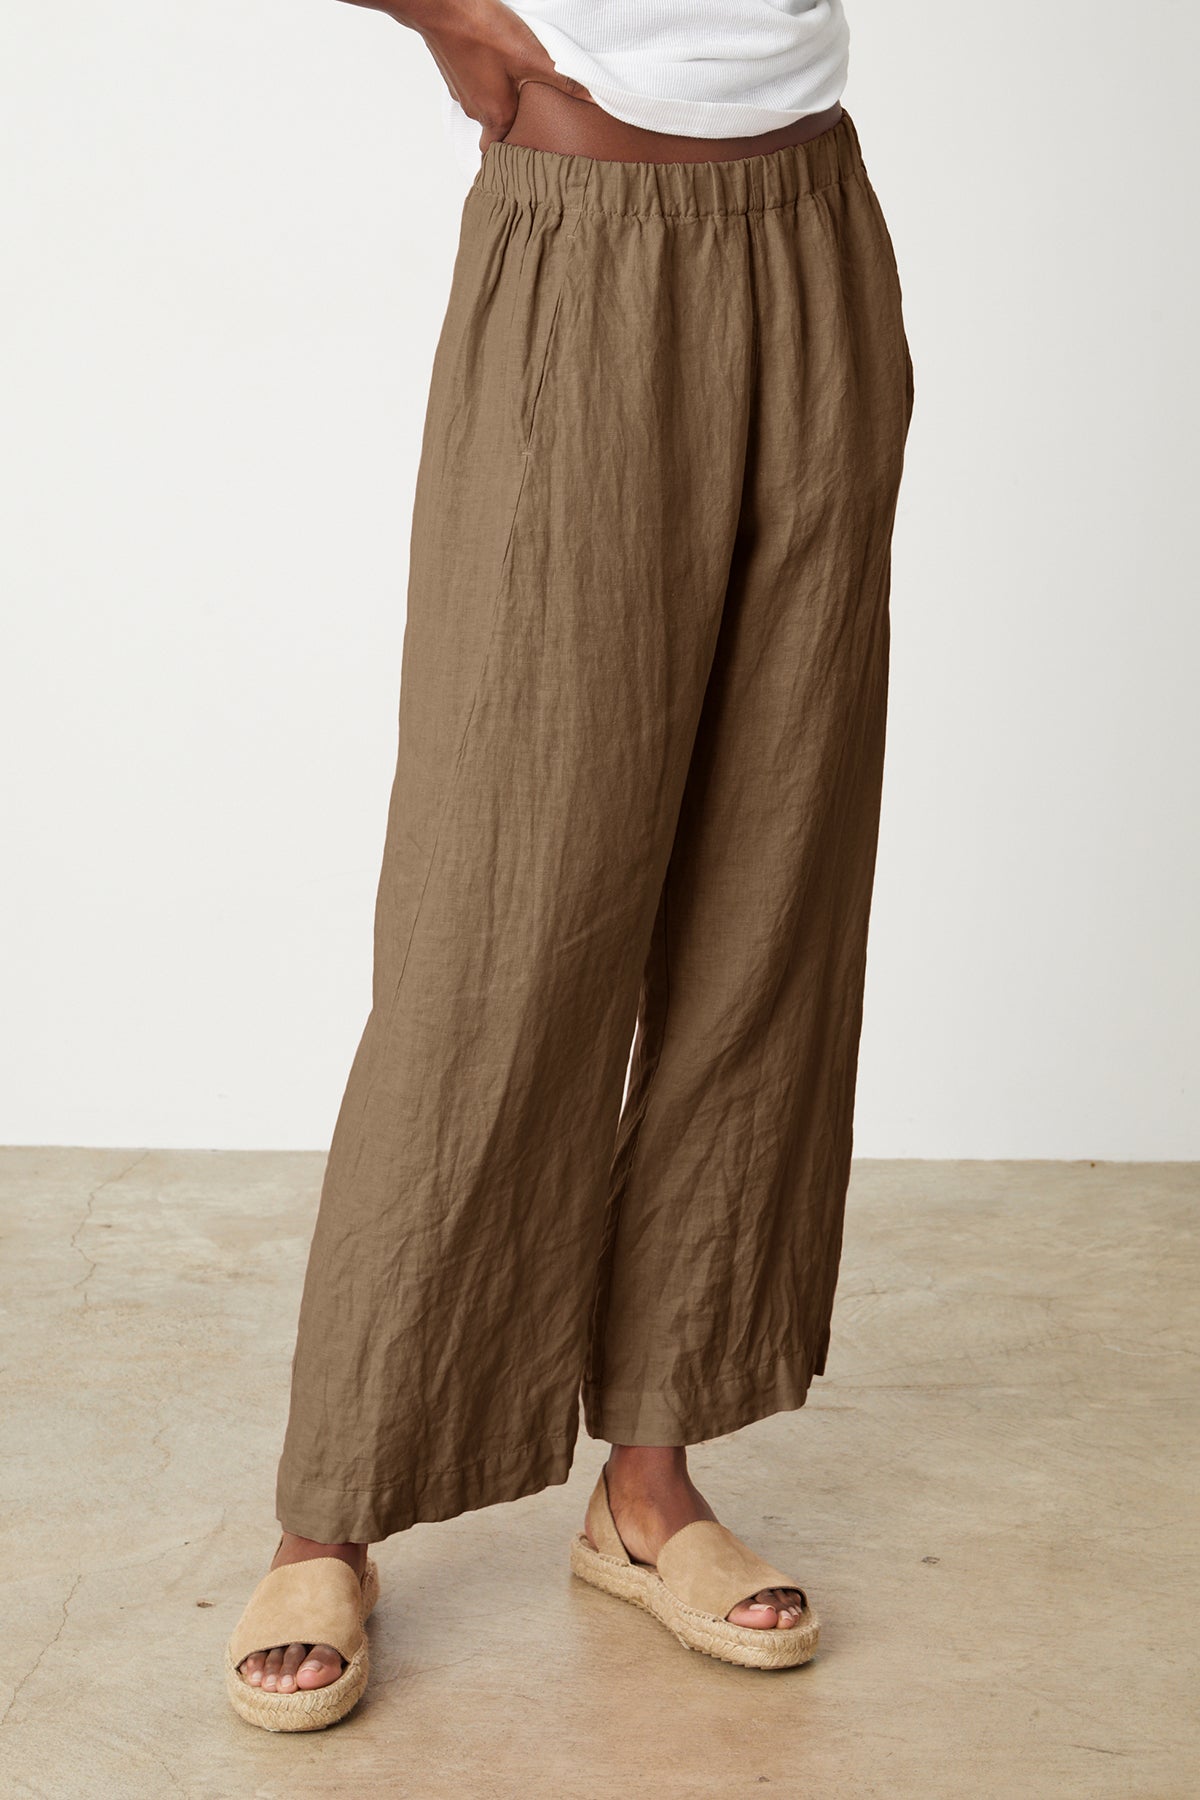 A woman wearing the LOLA LINEN PANT by Velvet by Graham & Spencer with an elastic waist.-26661490098369